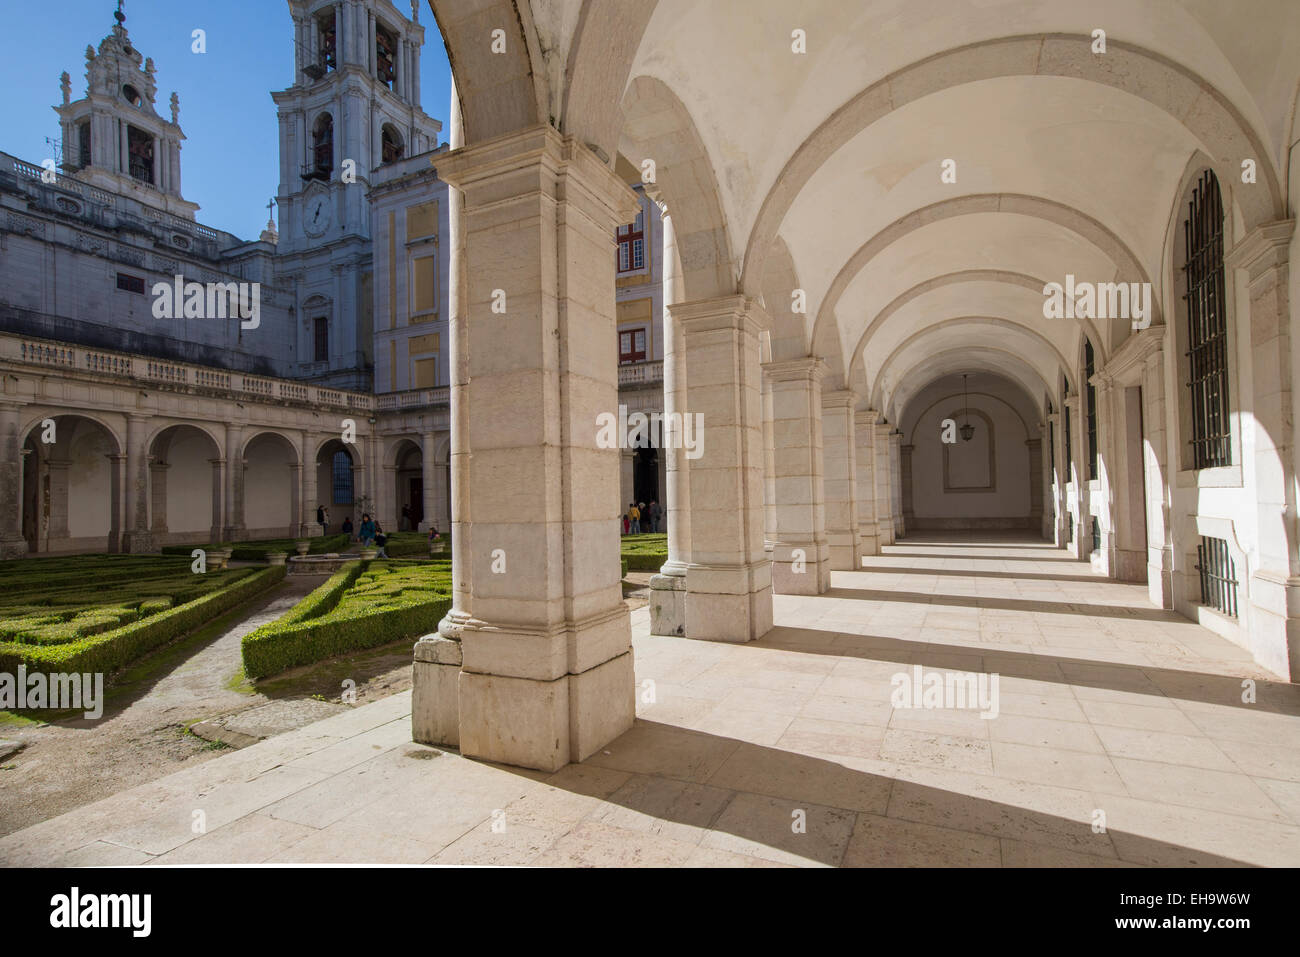 North Cloister of the Mafra National Palace, Convent and Basilica in Portugal. Franciscan Religious Order. Baroque architecture. Stock Photo